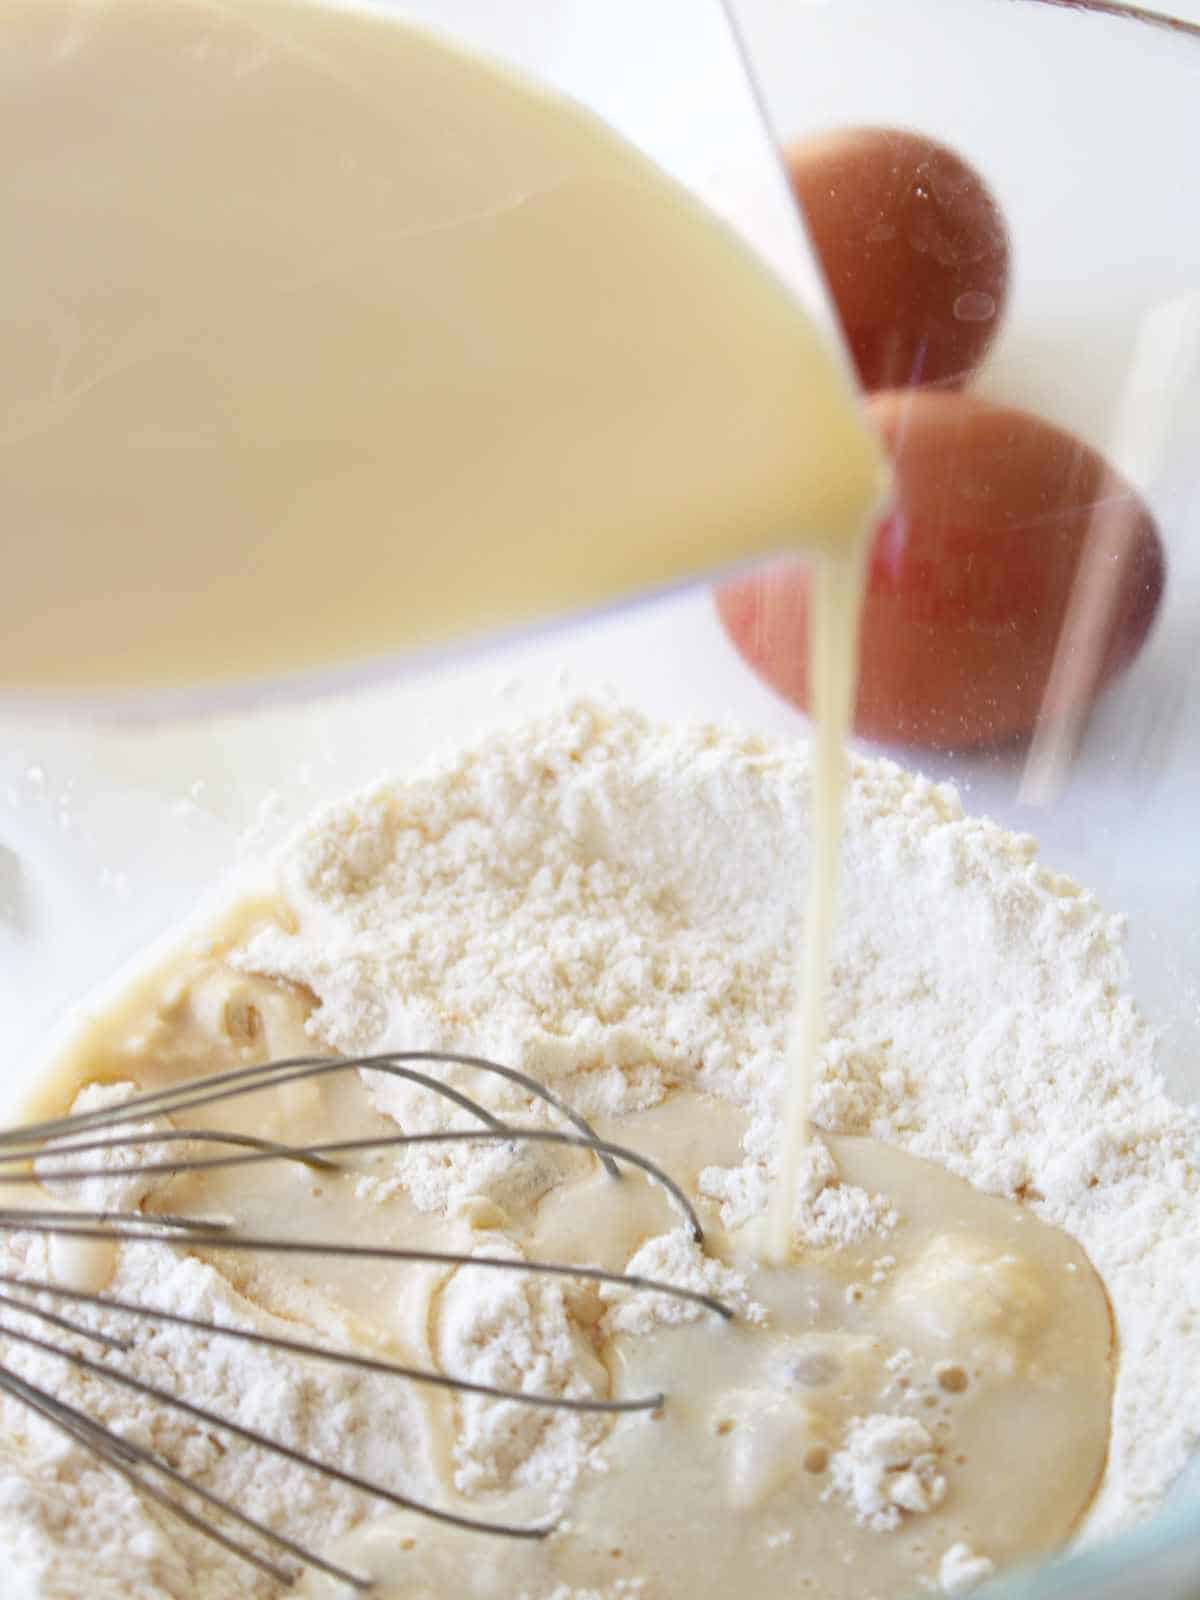 milk being poured into flour with eggs in the background.